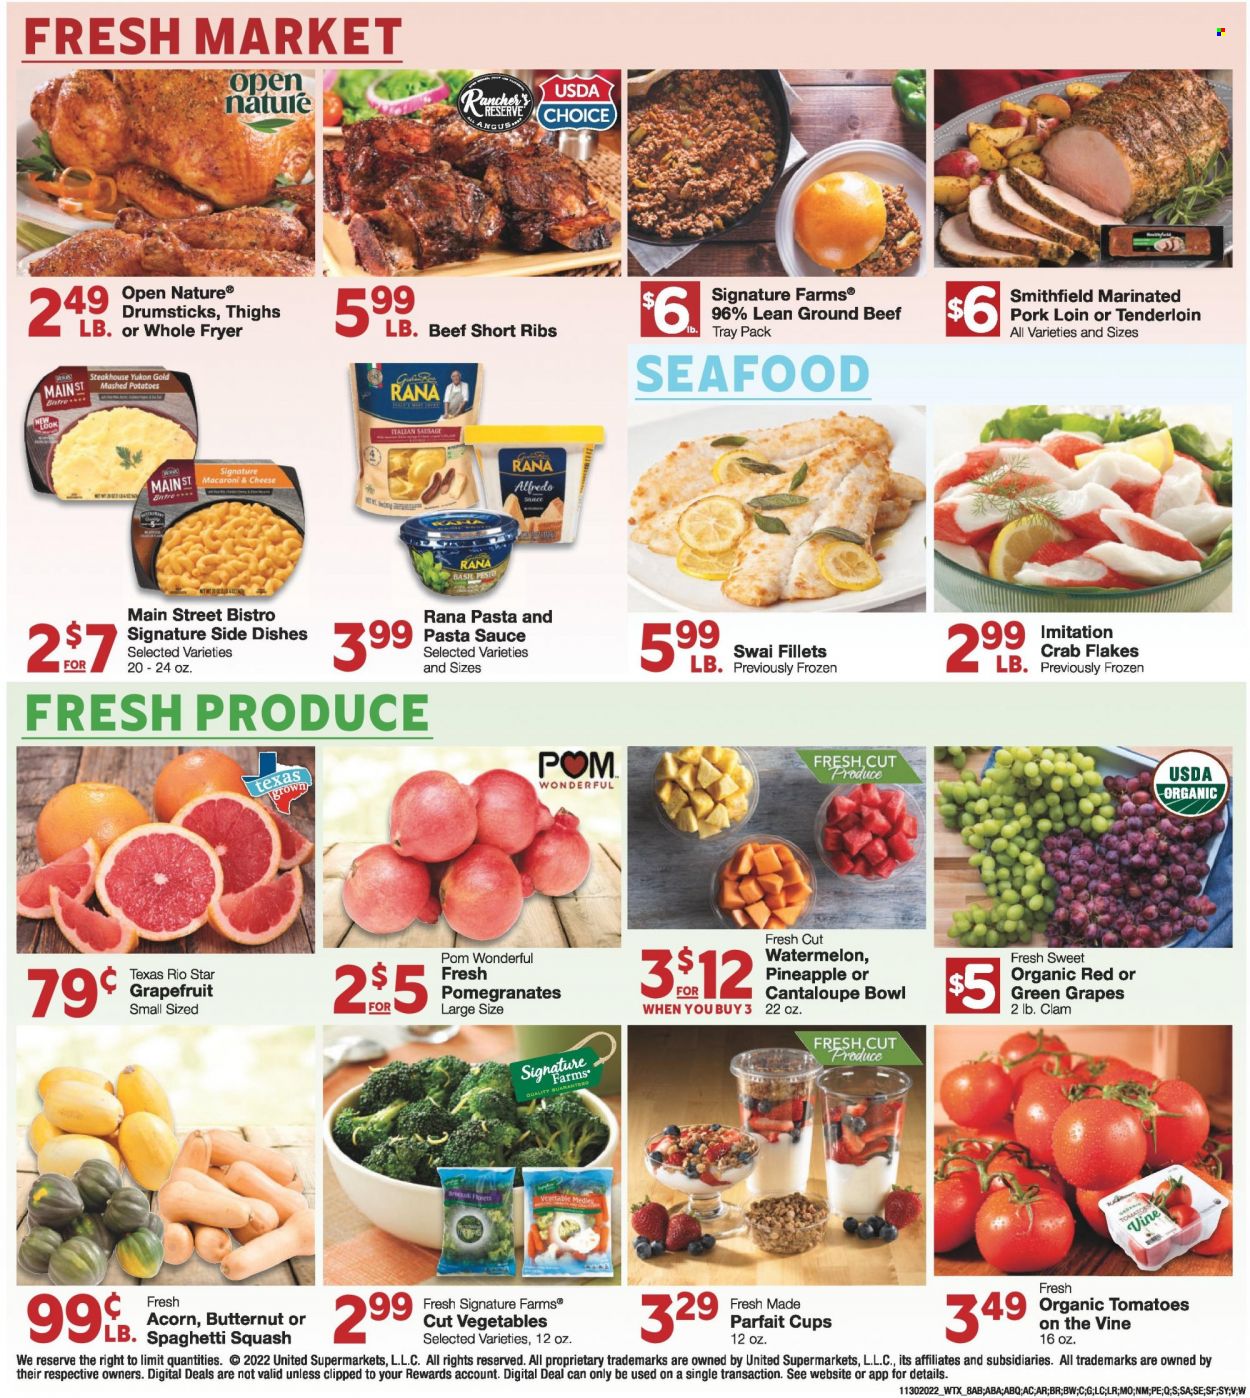 thumbnail - United Supermarkets Flyer - 11/30/2022 - 12/06/2022 - Sales products - broccoli, grapefruits, grapes, watermelon, beef meat, beef ribs, ground beef, pork loin, pork meat, marinated pork, clams, seafood, crab, swai fillet, macaroni & cheese, mashed potatoes, spaghetti, pasta sauce, sauce, Alfredo sauce, Rana, sausage, italian sausage, pesto, cup, bowl, butternut squash, pomegranate. Page 8.